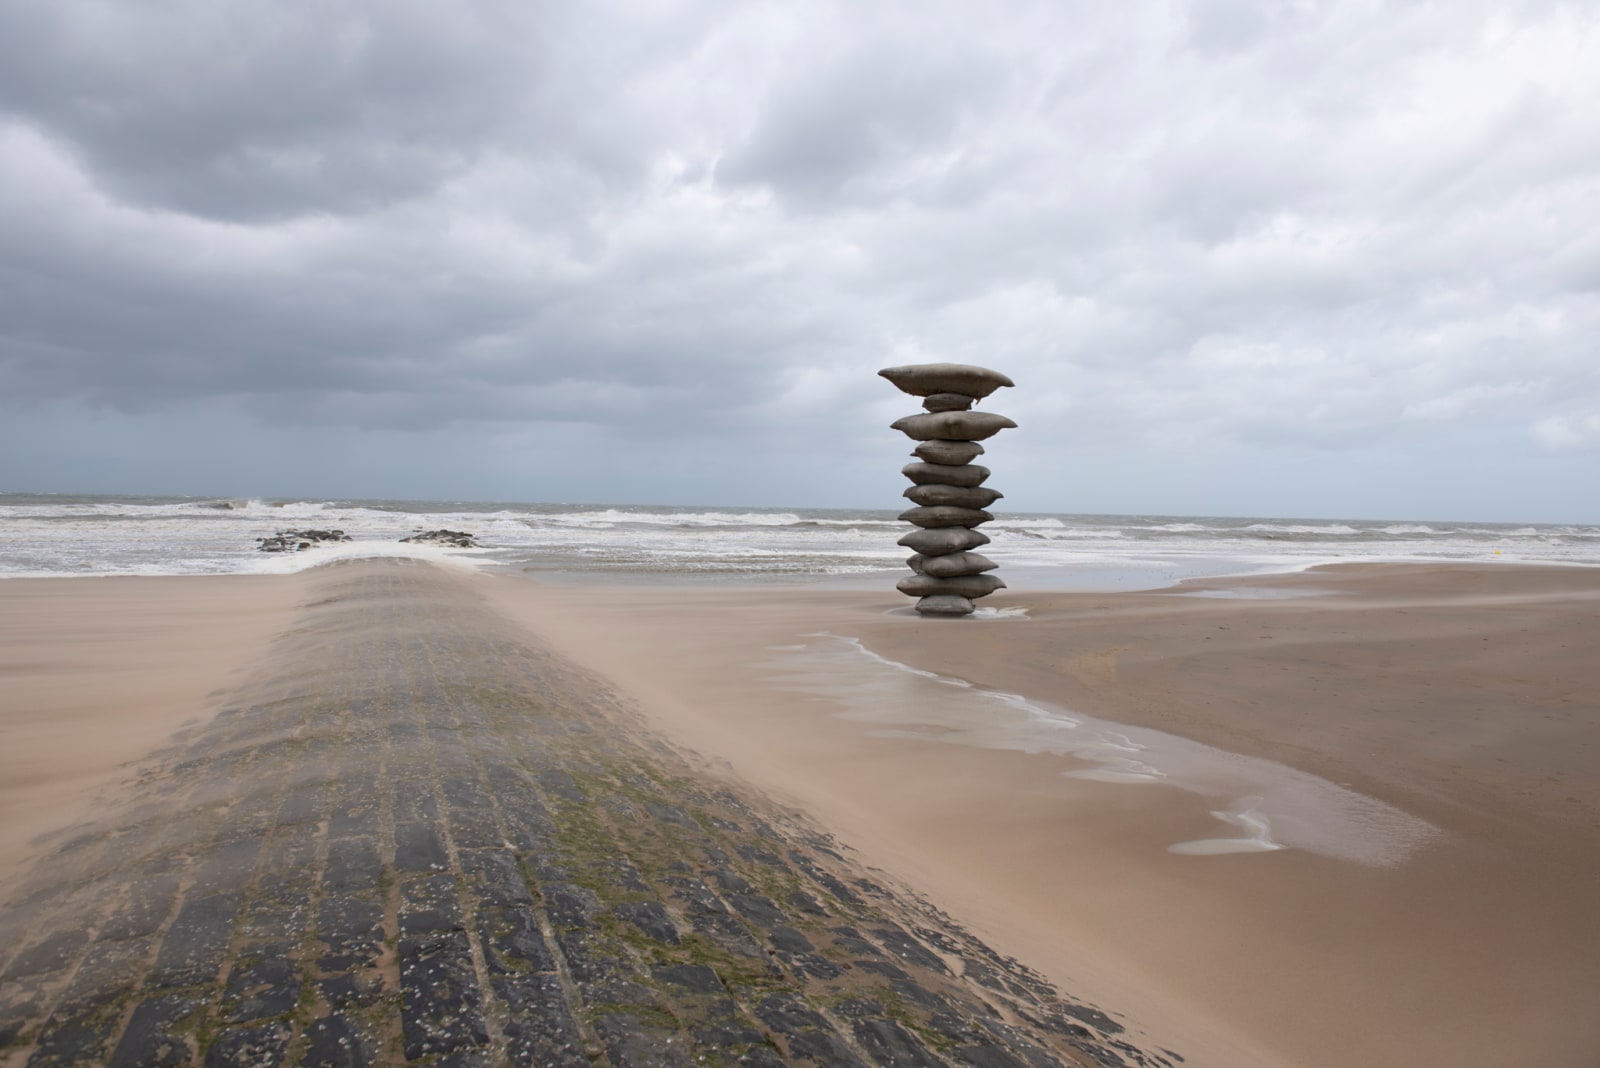 <div class="image_caption_container"><div class="image_caption">Rosa Barba, <strong>Pillage of the Sea</strong>, permanent sculpture for Beaufort Triennial, Belgium, 2021. Photo © Beaufort Triennial</div></div>